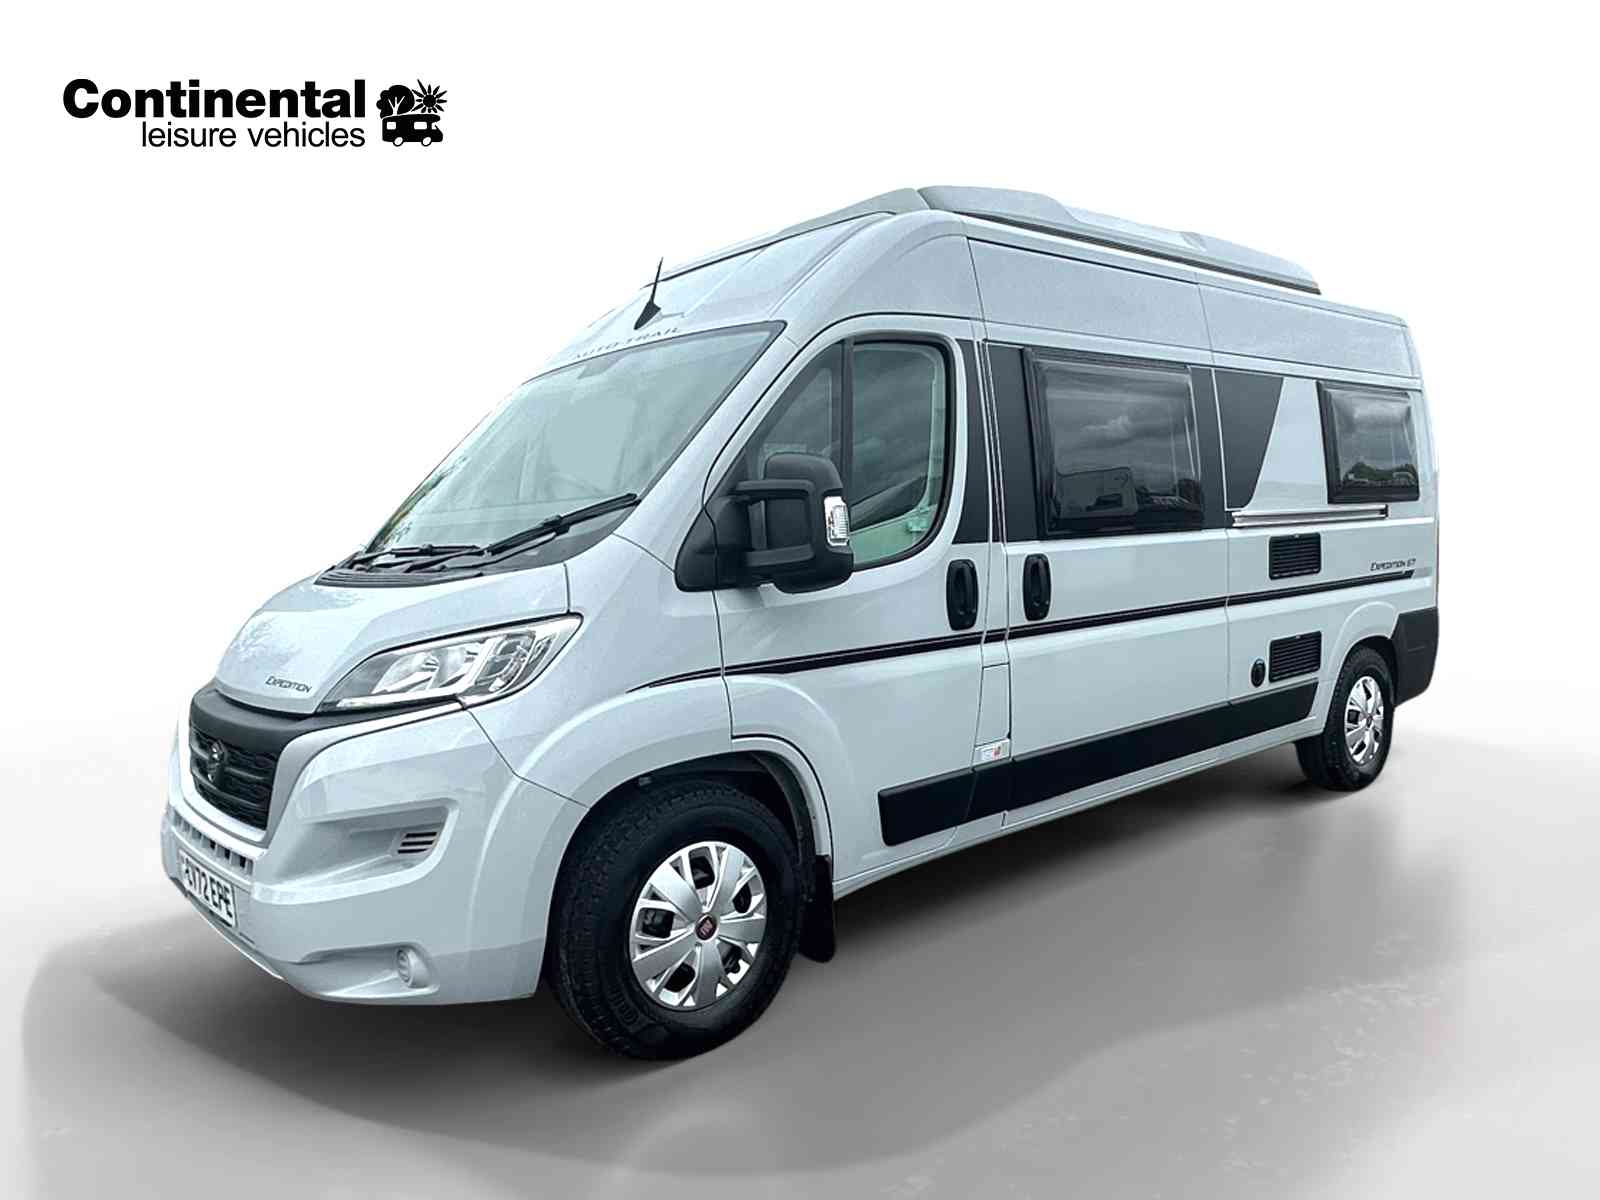 Picture of Auto-Trail Expedition 67